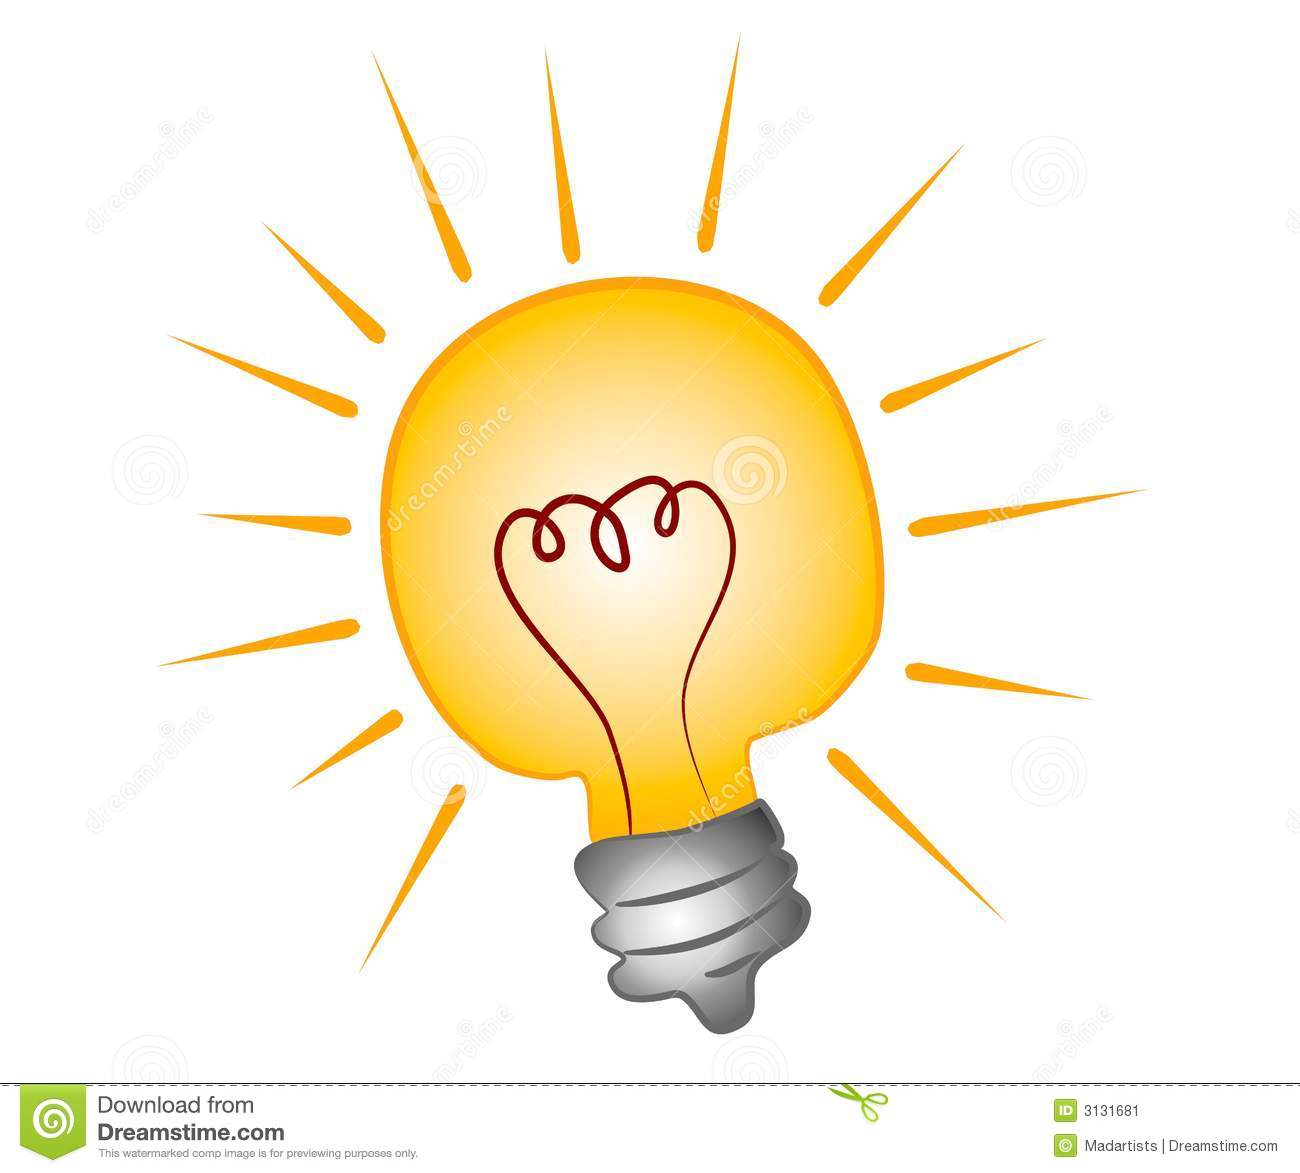 Simple Clip Art Illustration Of A Bright Shining Light Bulb Isolated